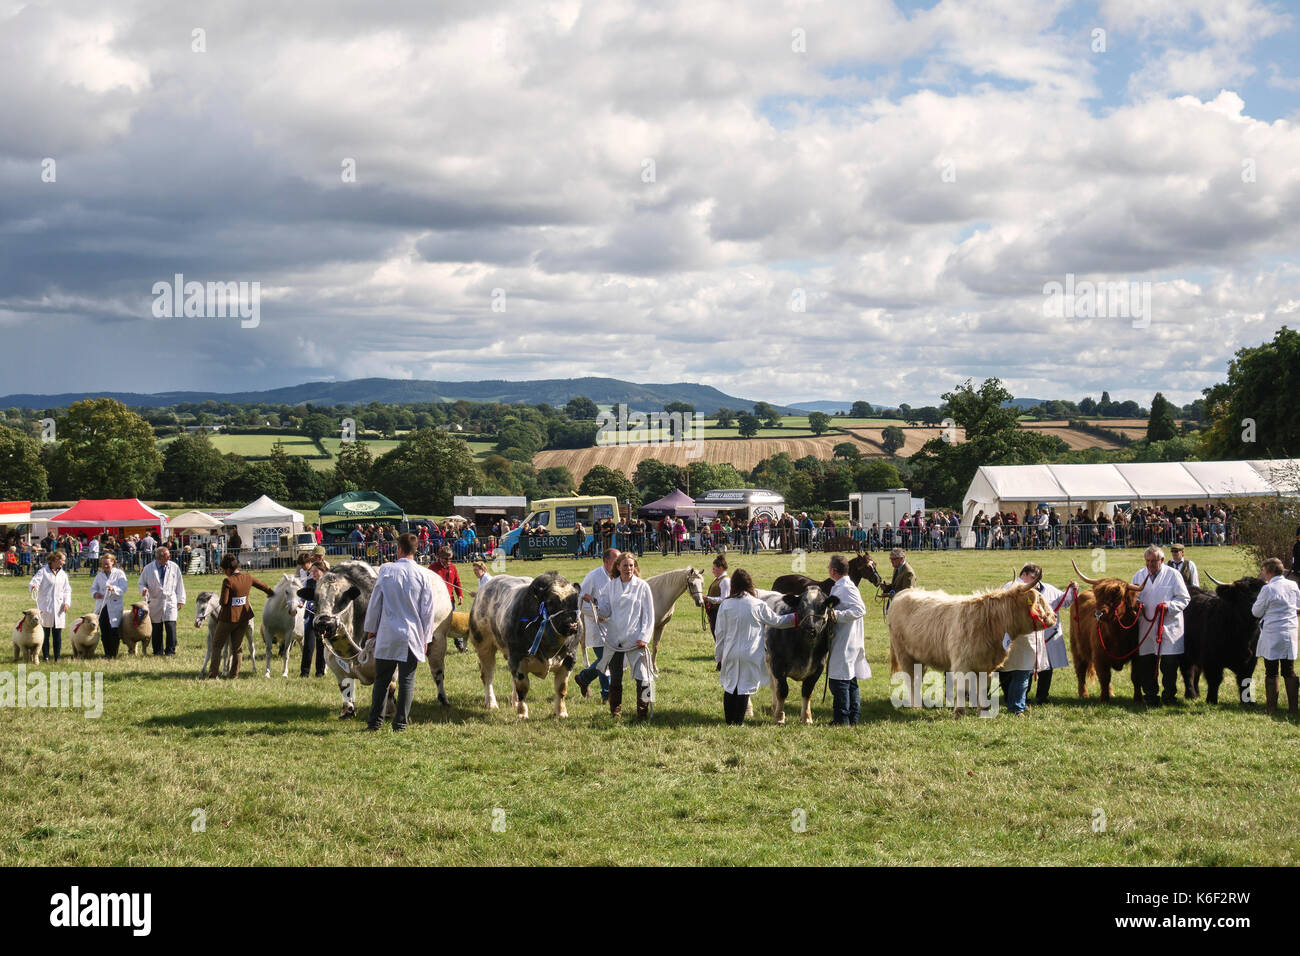 The Kington Show (Kington Horse Show & Agricultural Society), Herefordshire, UK. A traditional livestock, produce and horticultural show Stock Photo